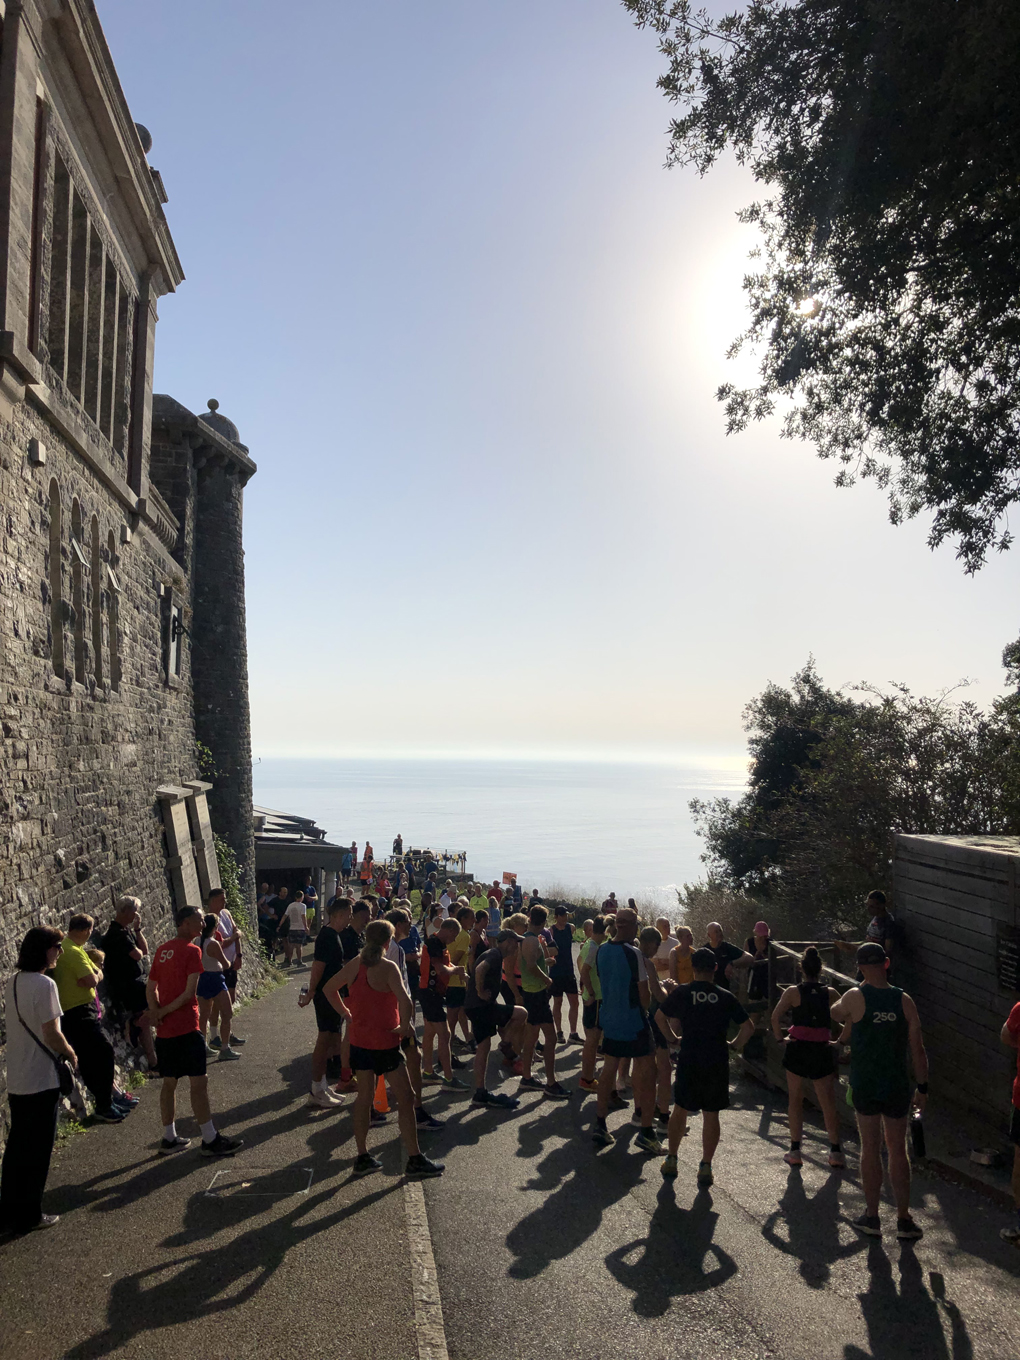 A crowd of people in running gear, with a stone fort on the left and the blue sky and sea extending to the horizon.